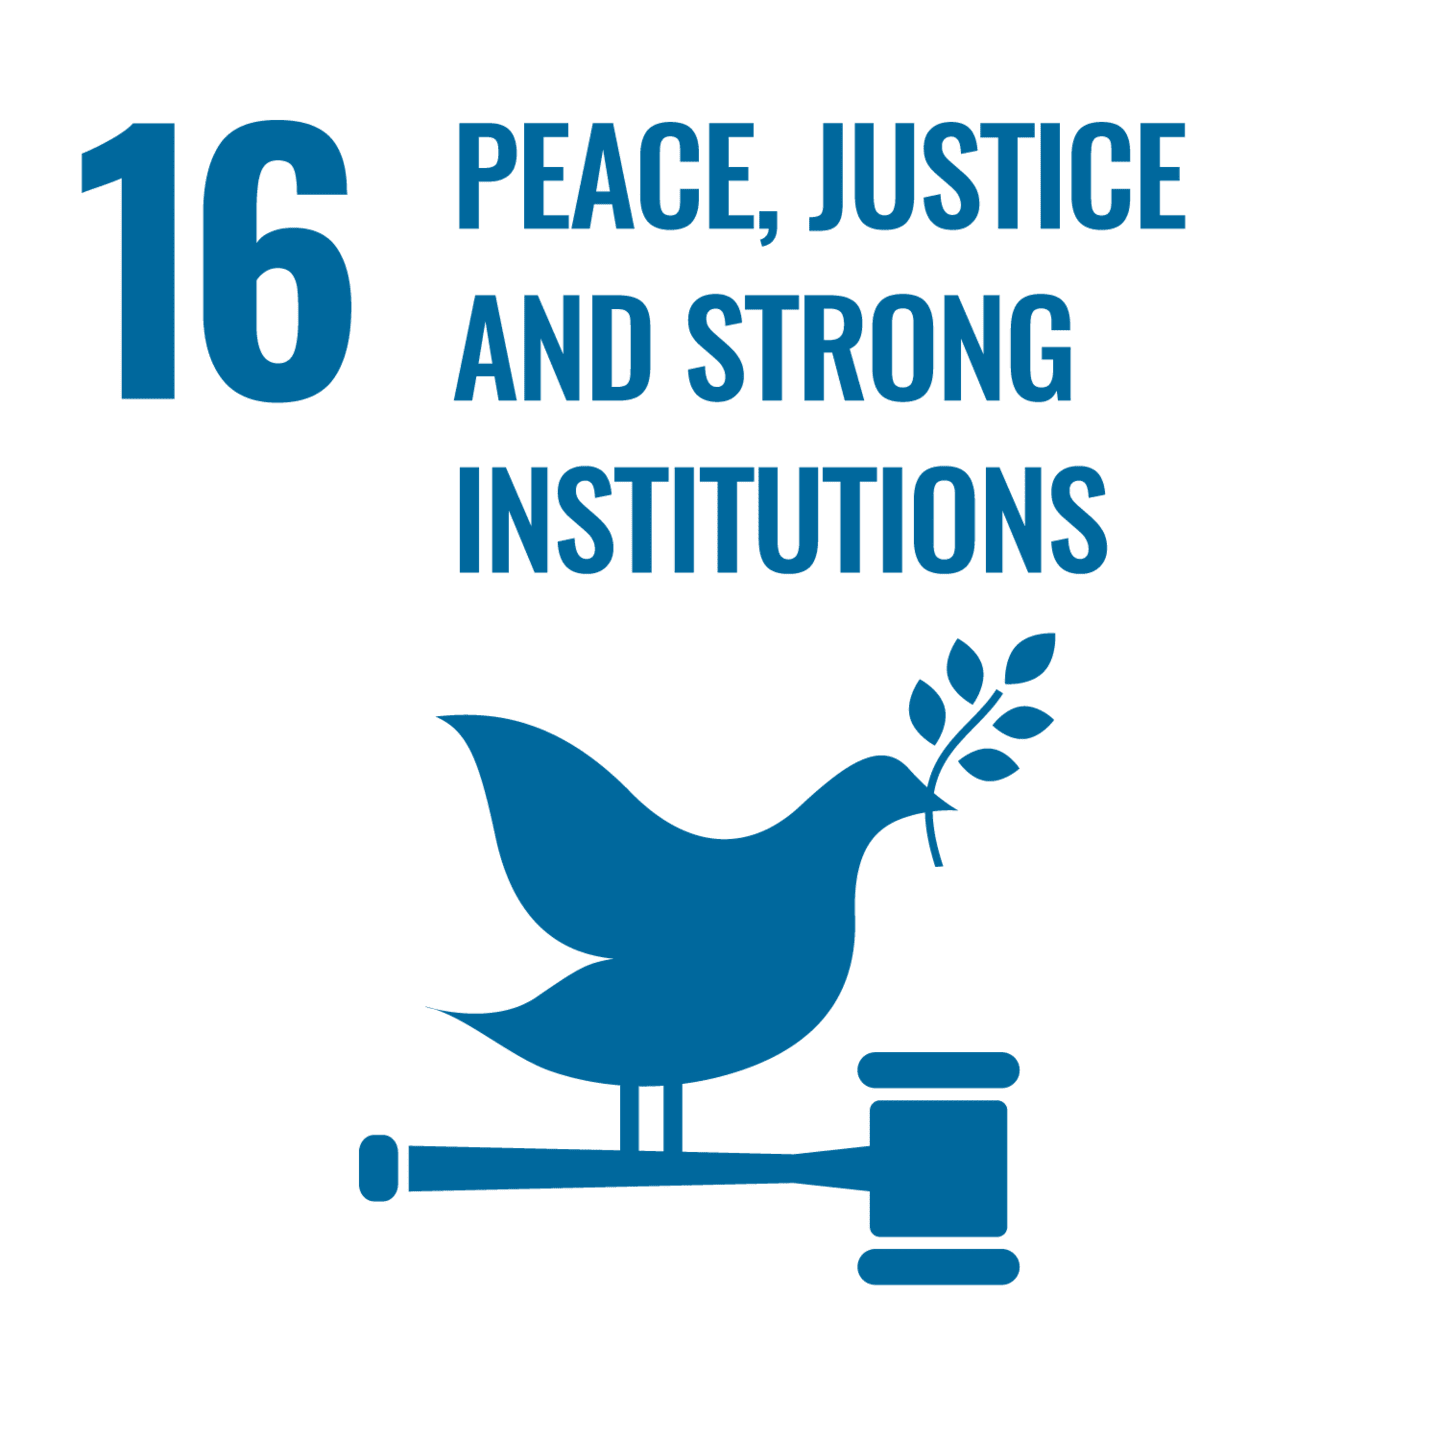 UN Sustainable Development Goal 16: Peace, Justice and Strong Institutions